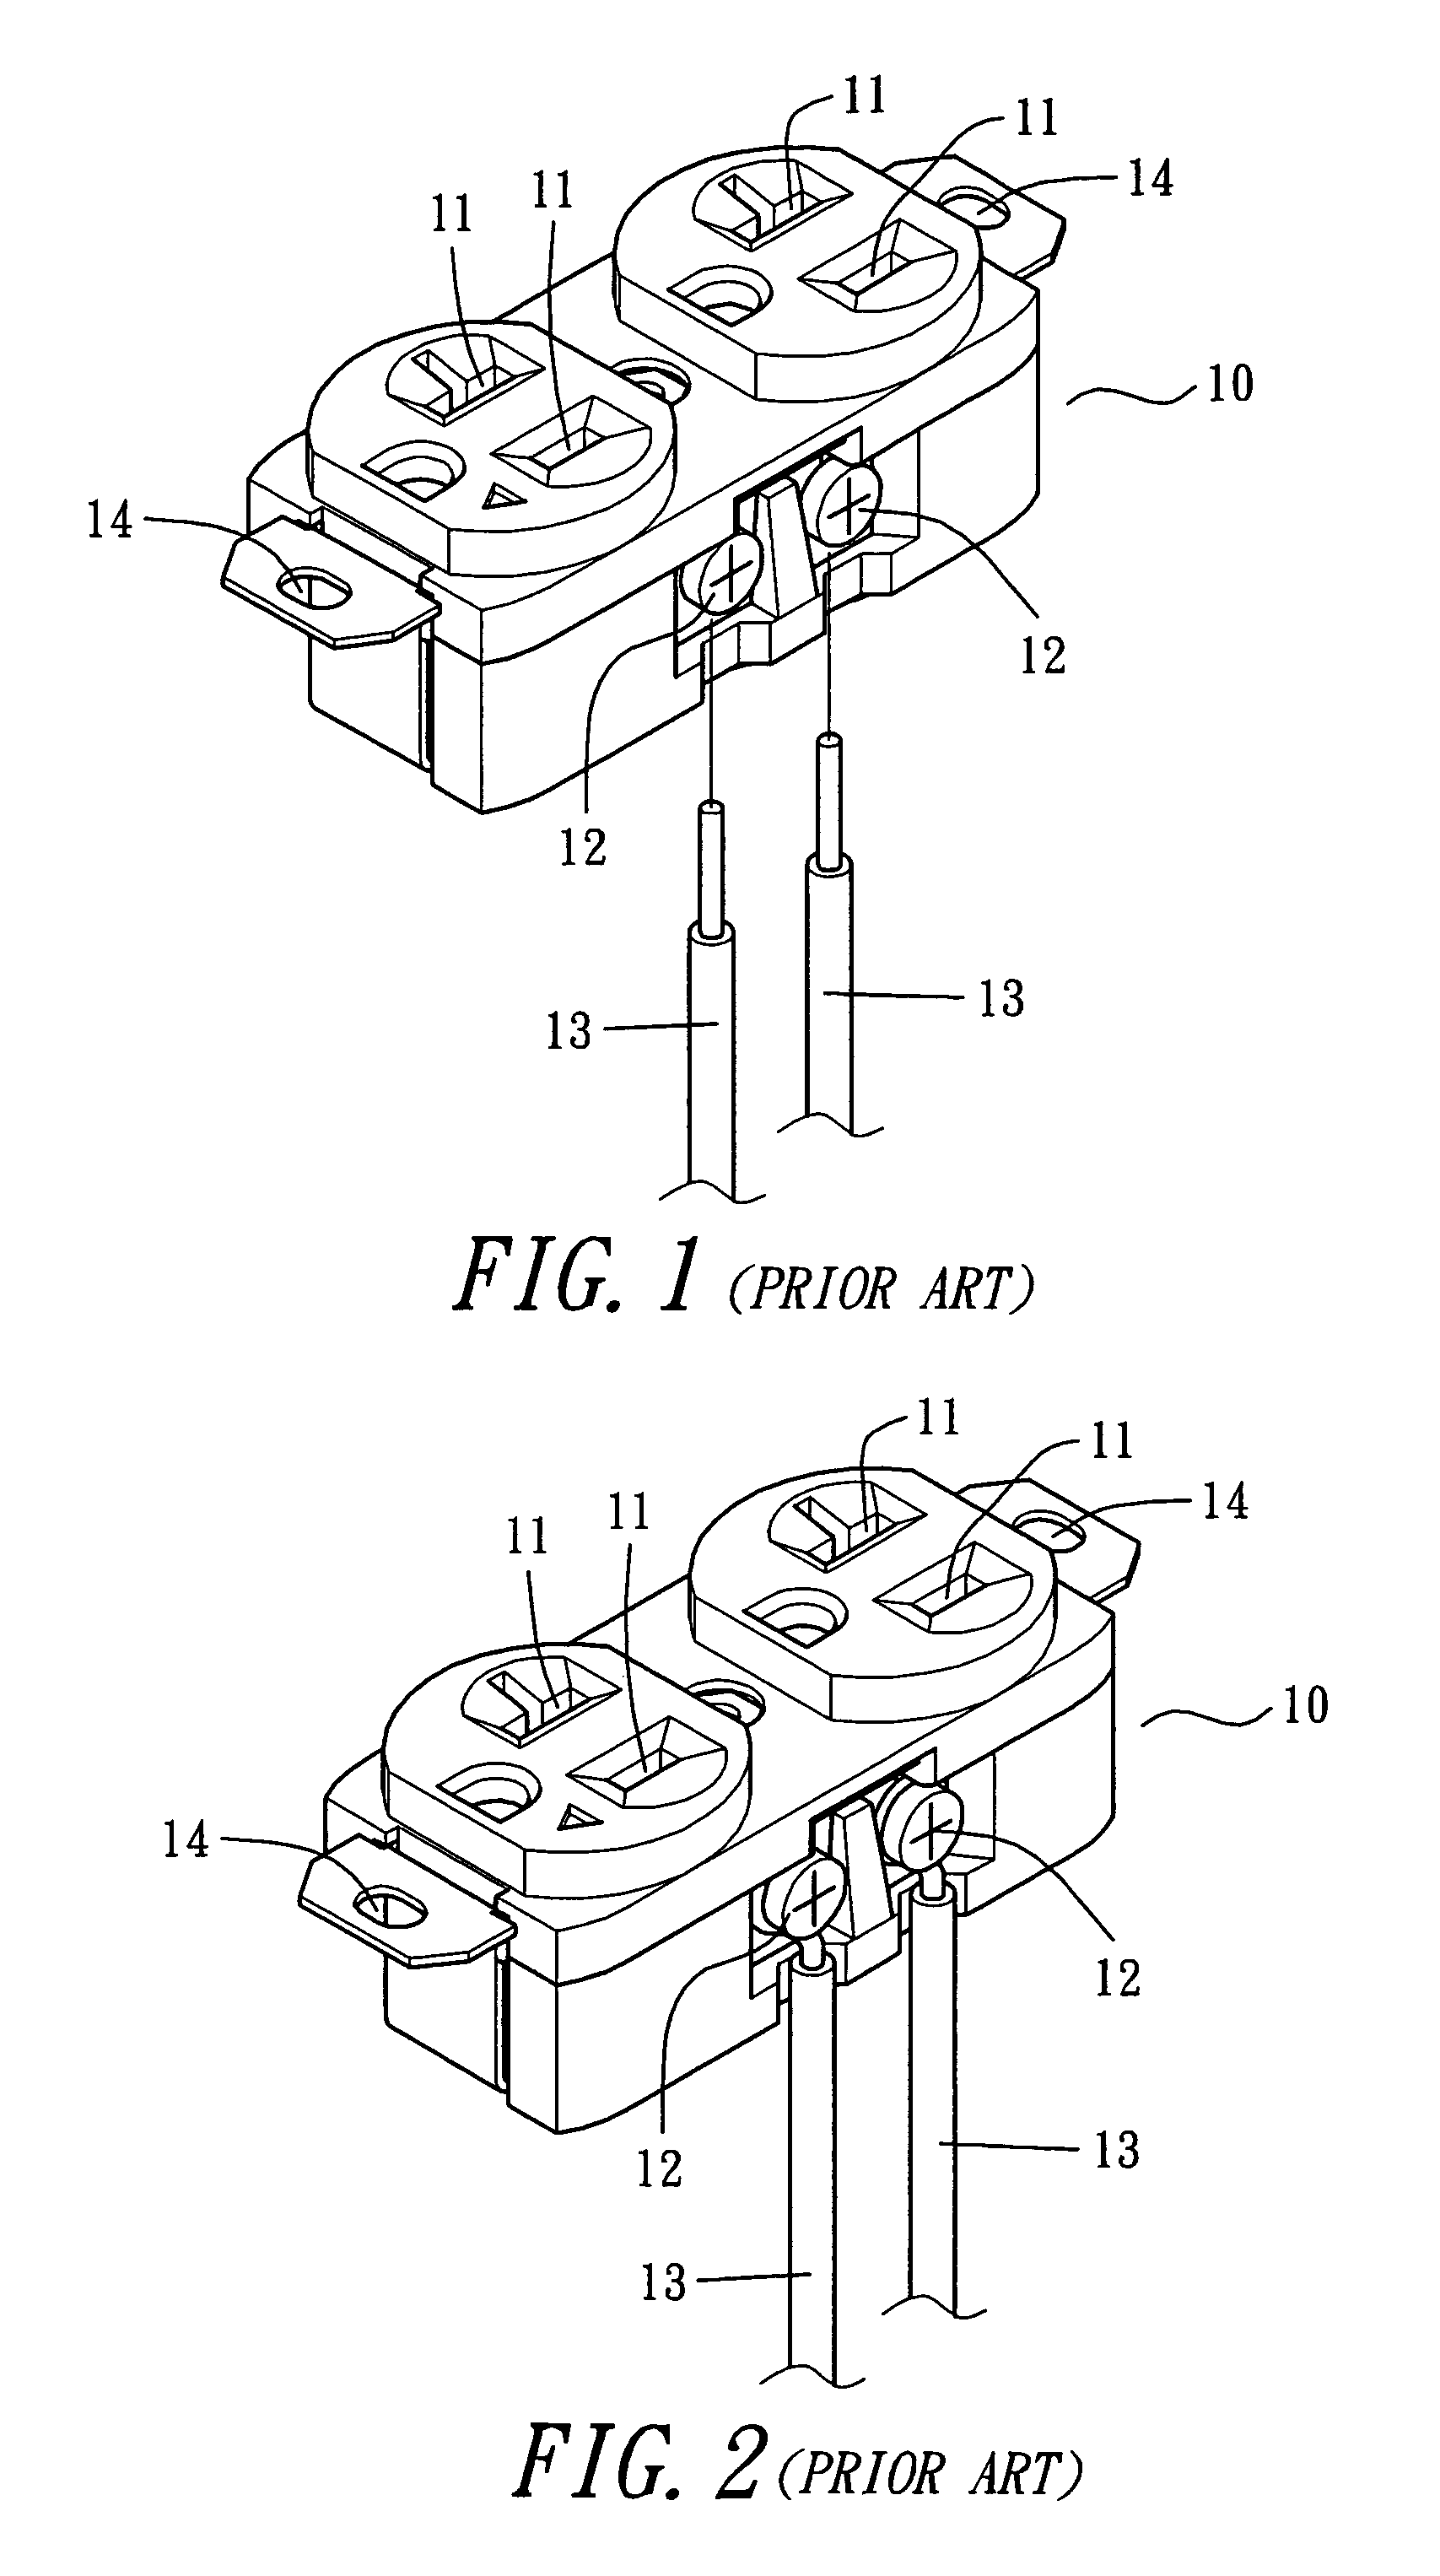 Cover for terminal screws of a receptacle